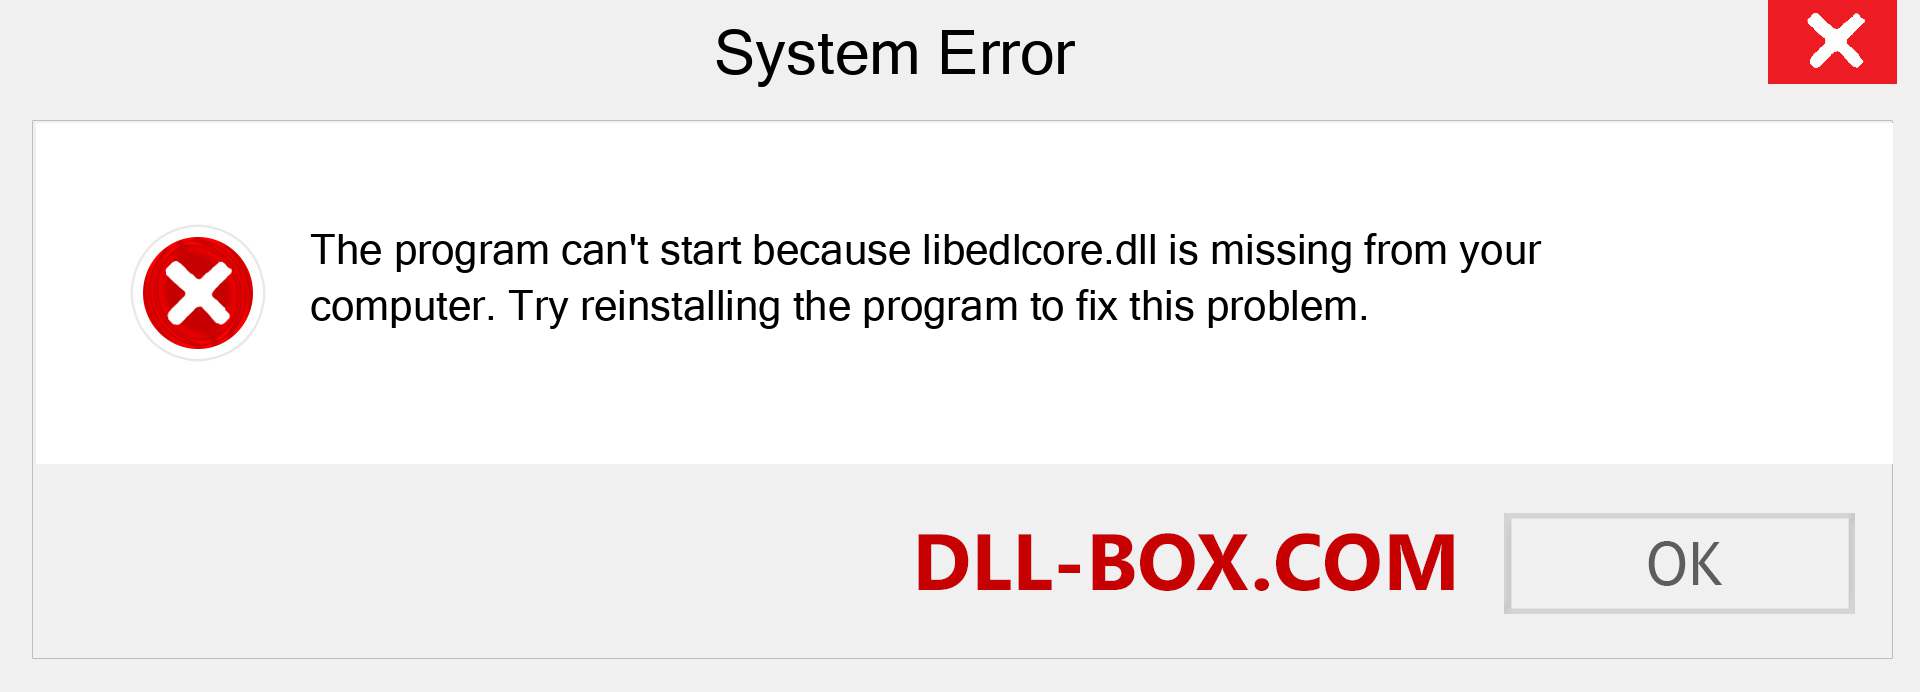  libedlcore.dll file is missing?. Download for Windows 7, 8, 10 - Fix  libedlcore dll Missing Error on Windows, photos, images